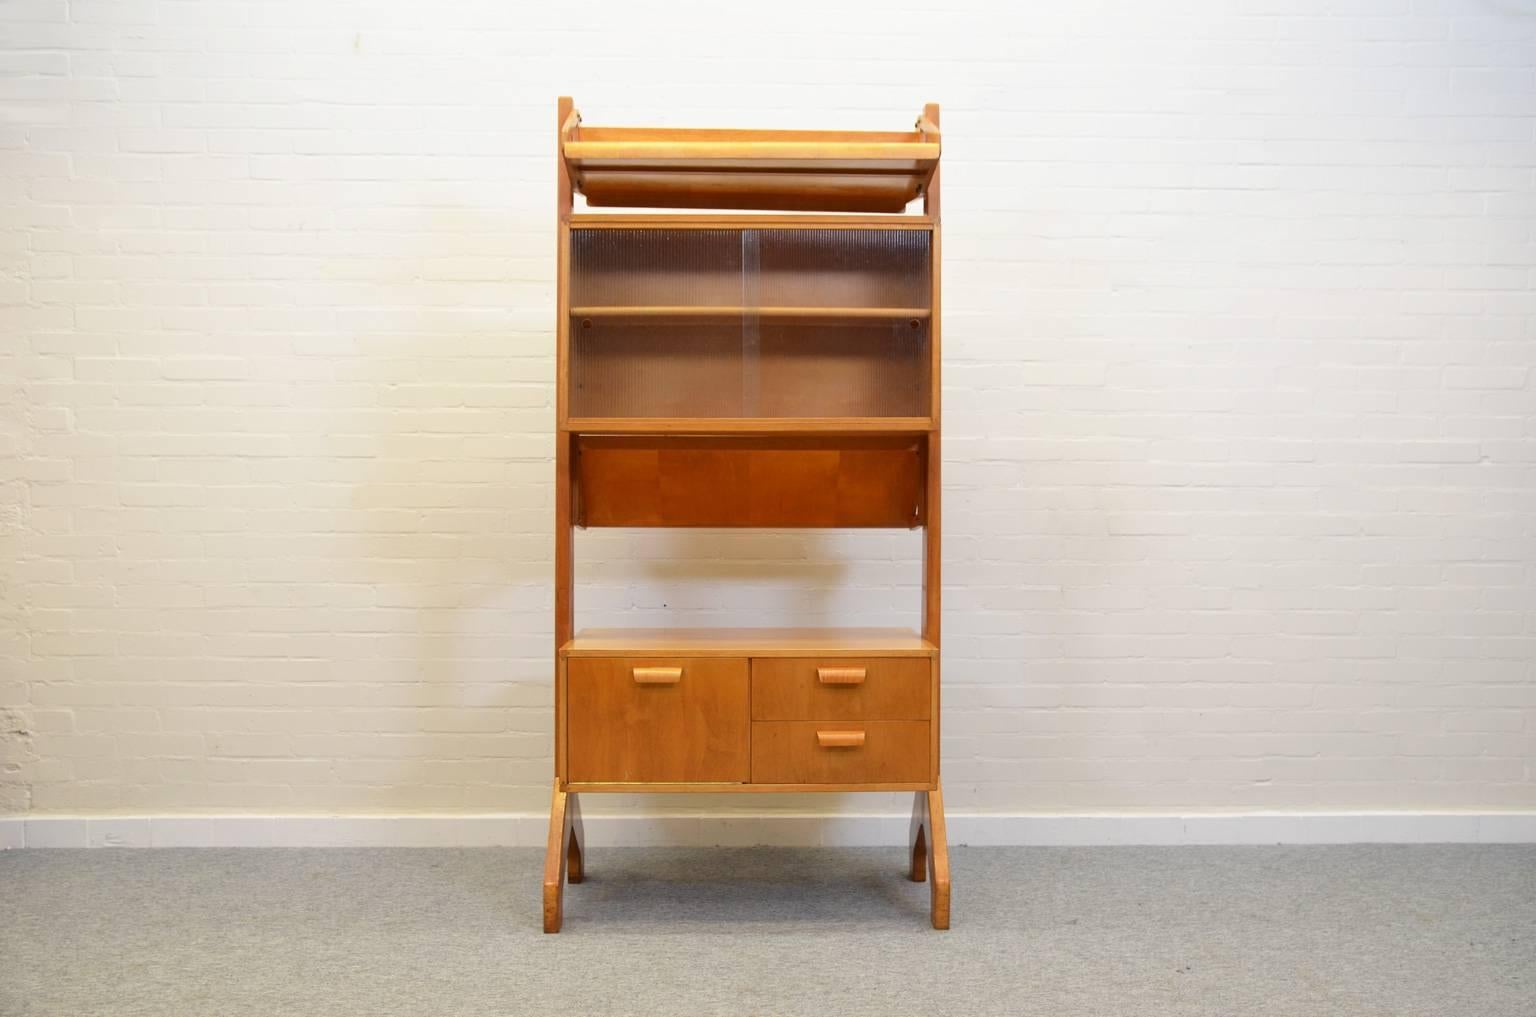 Midcentury beech room divider made from the Combex series (model BB06) by Cees Braakman. Mostly seen as a wall cabinet but this model is designed as room divider with cabinets and shelves which can be used on both sides. Marked 'Pastoe' on the